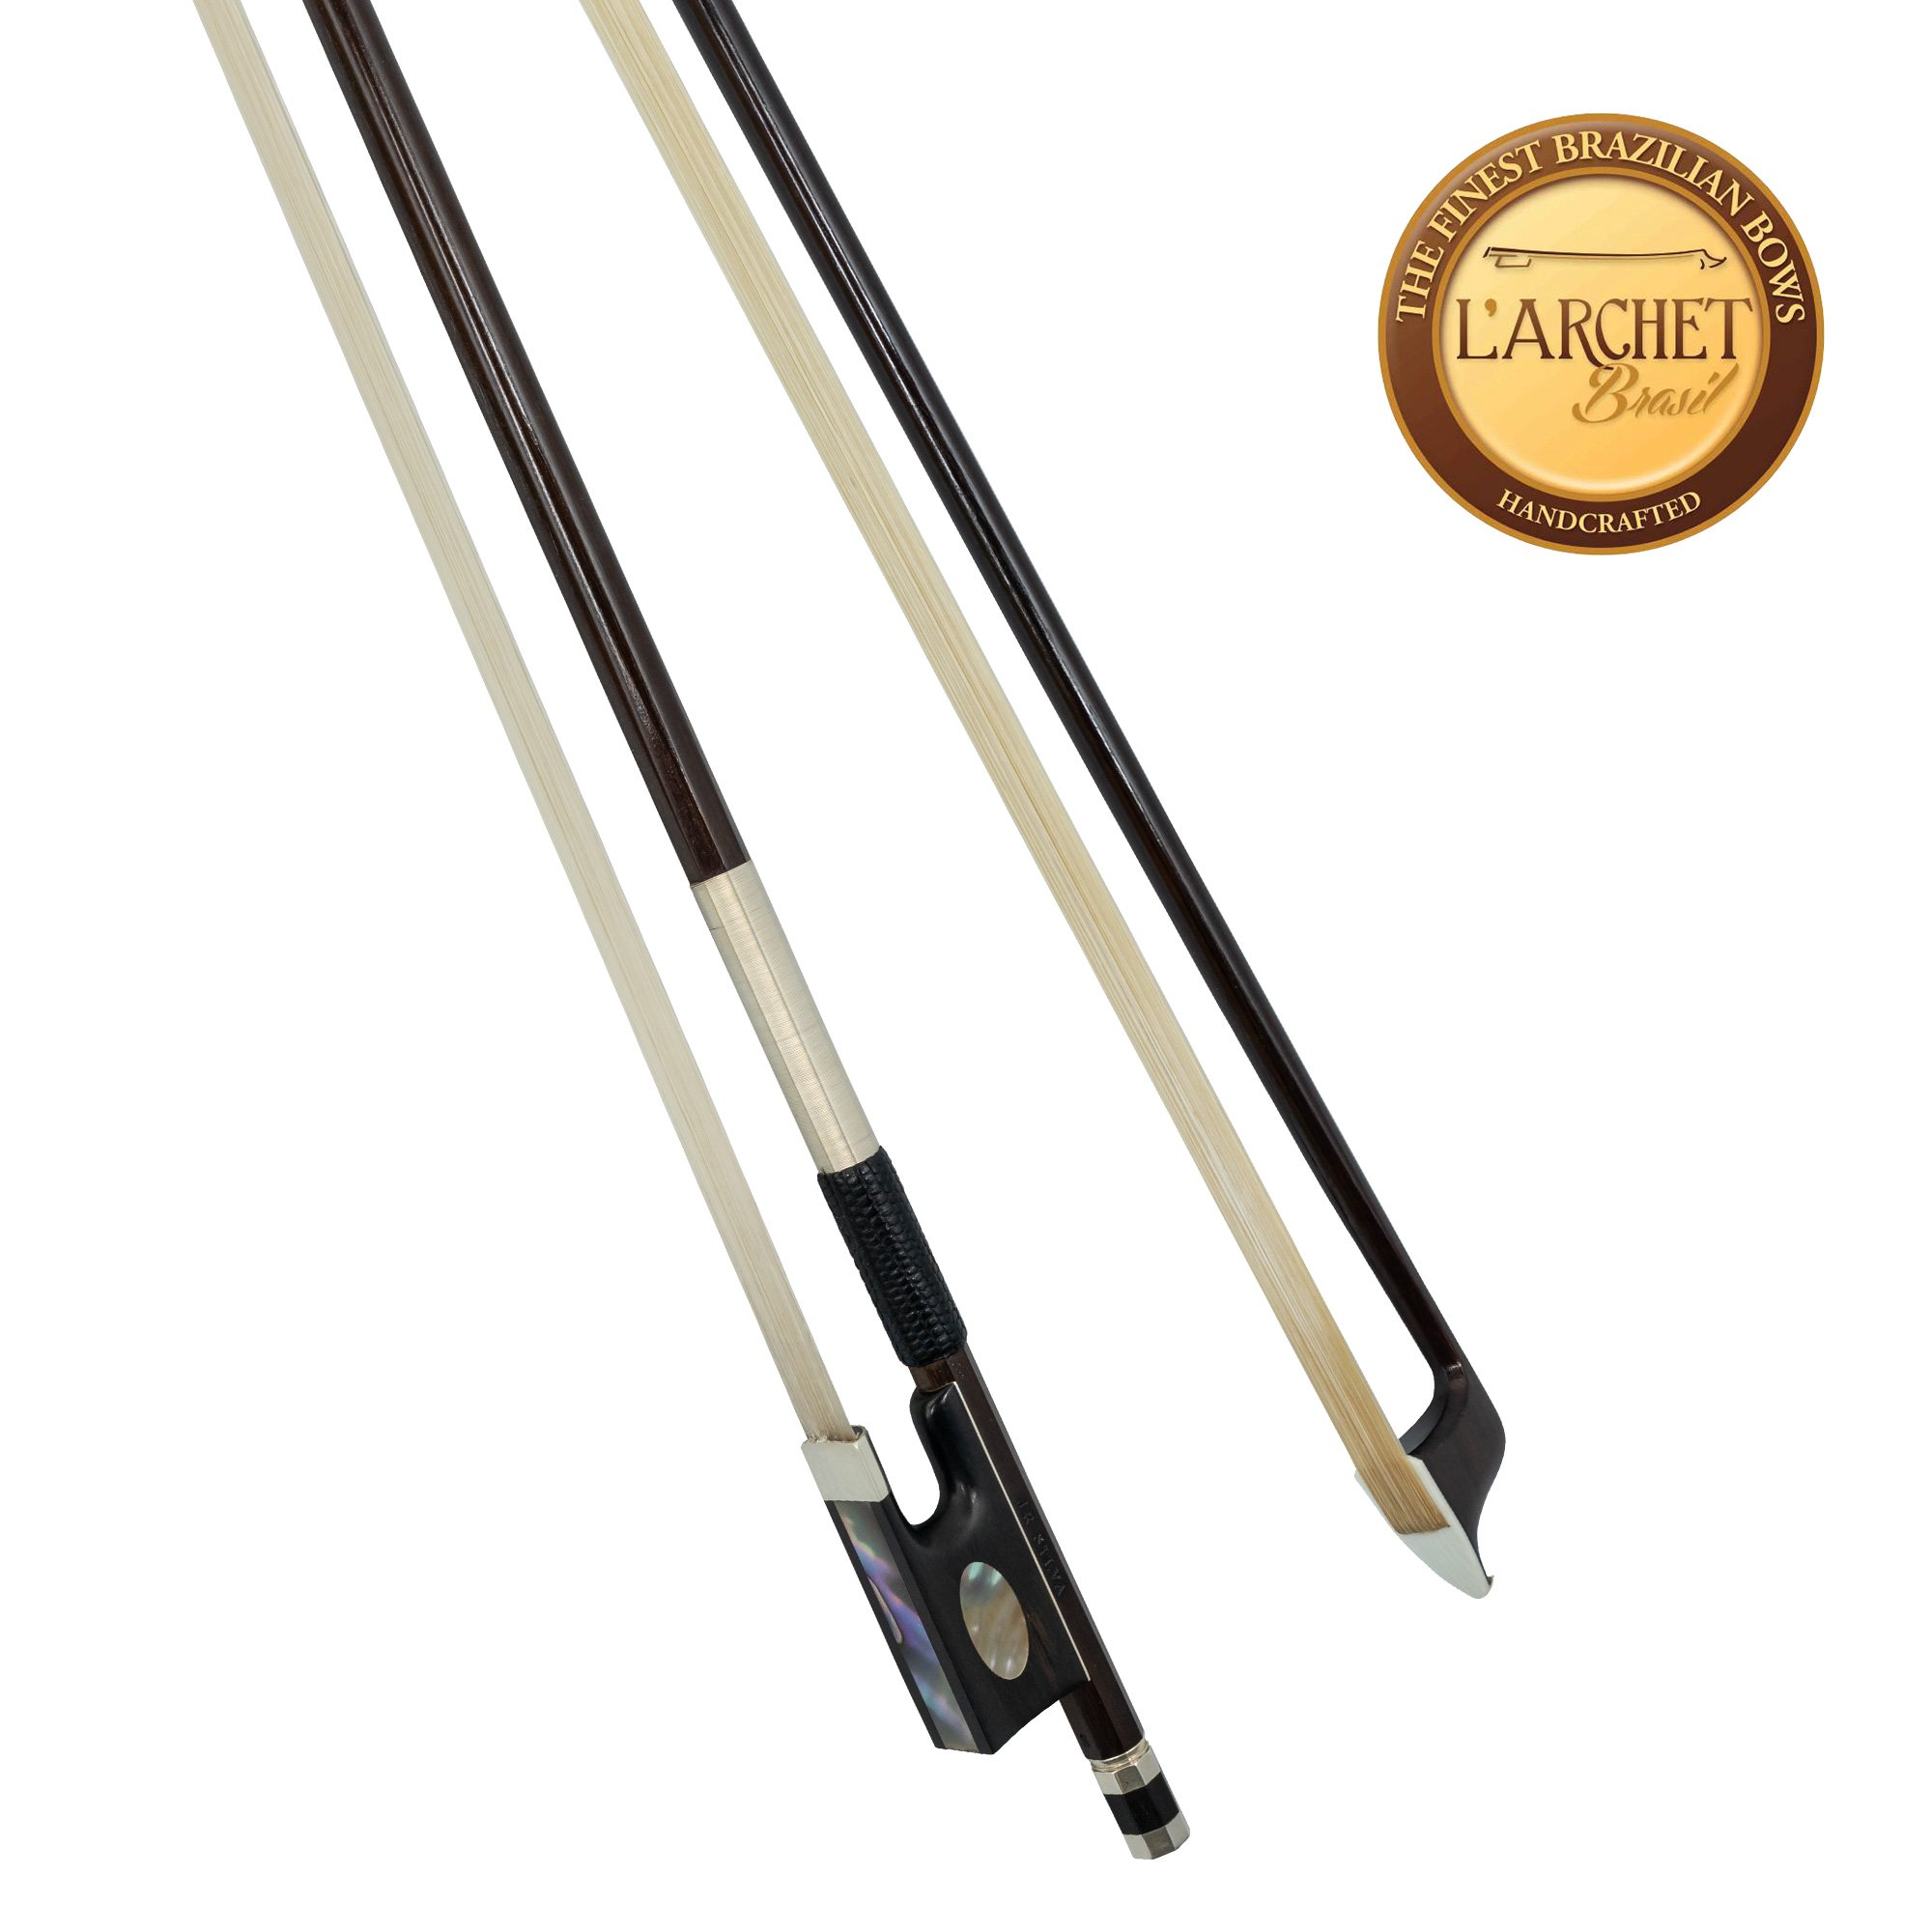 L'archet Brasil Silver Full-Mount Ipe Violin Bows Various Styles in action